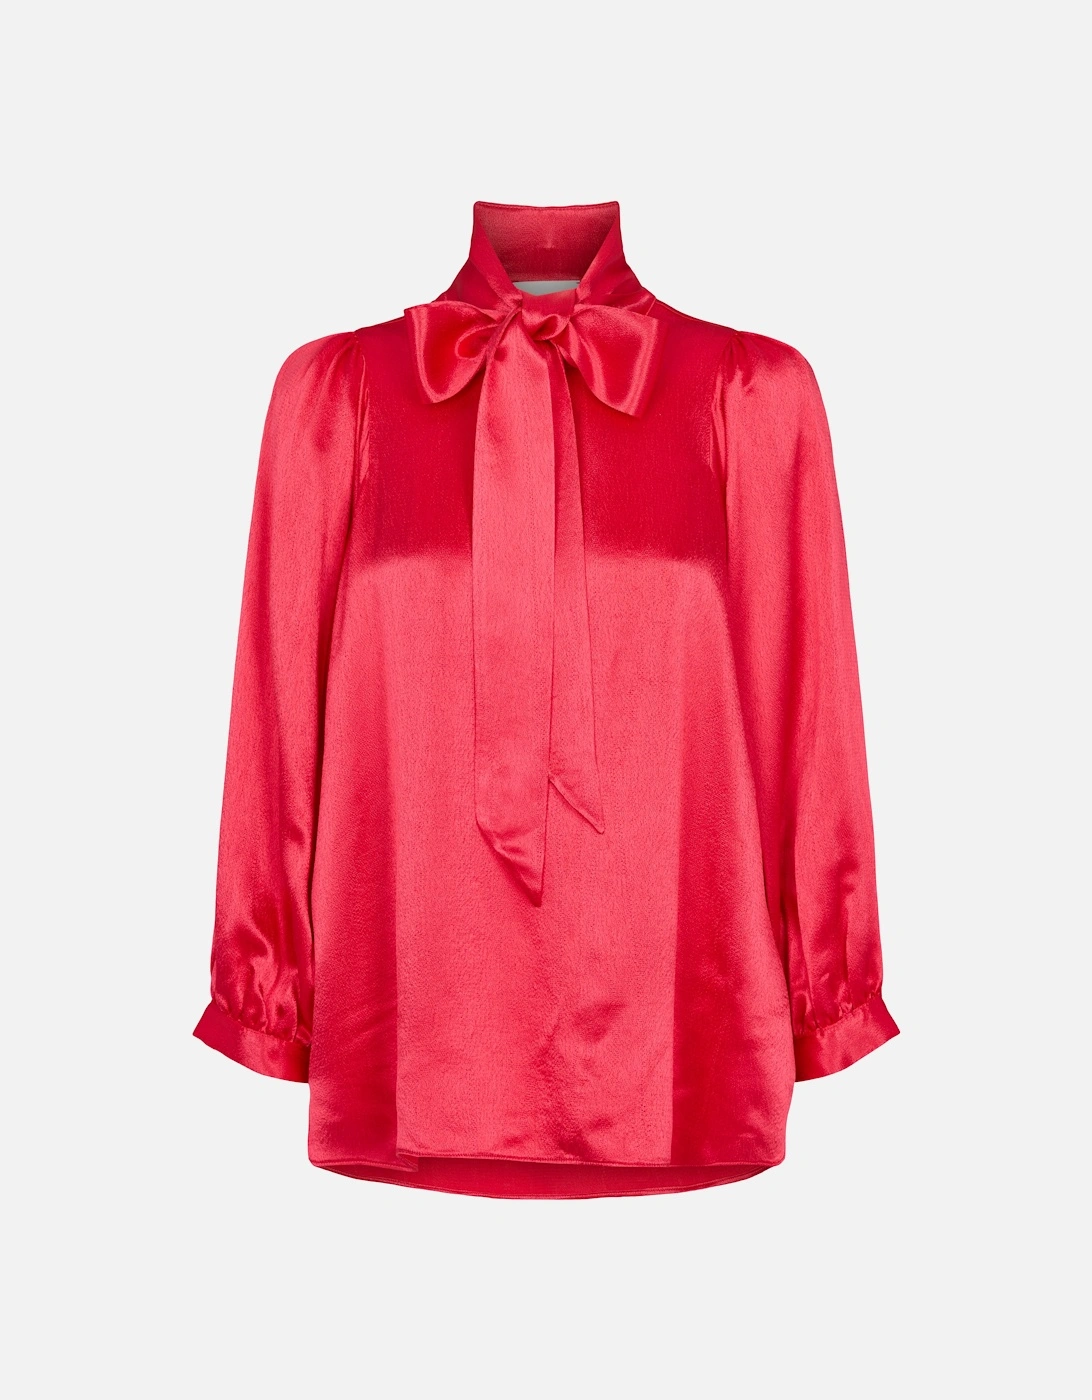 Moonlight Blouse - Rose Red